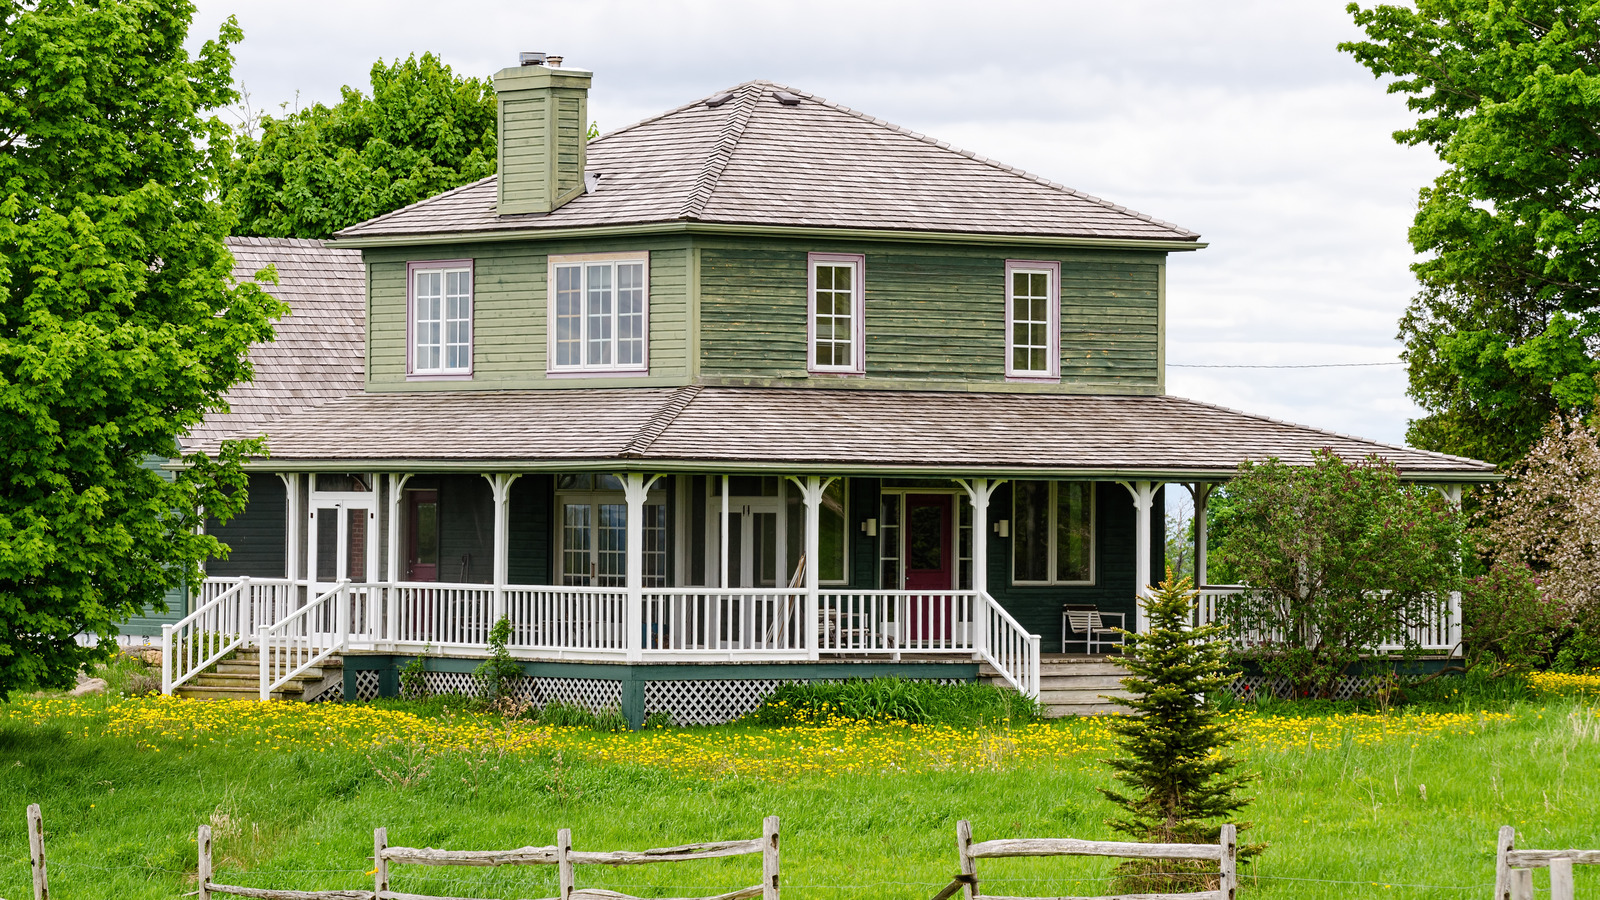 How Much Does It Cost To Build A Wraparound Porch?